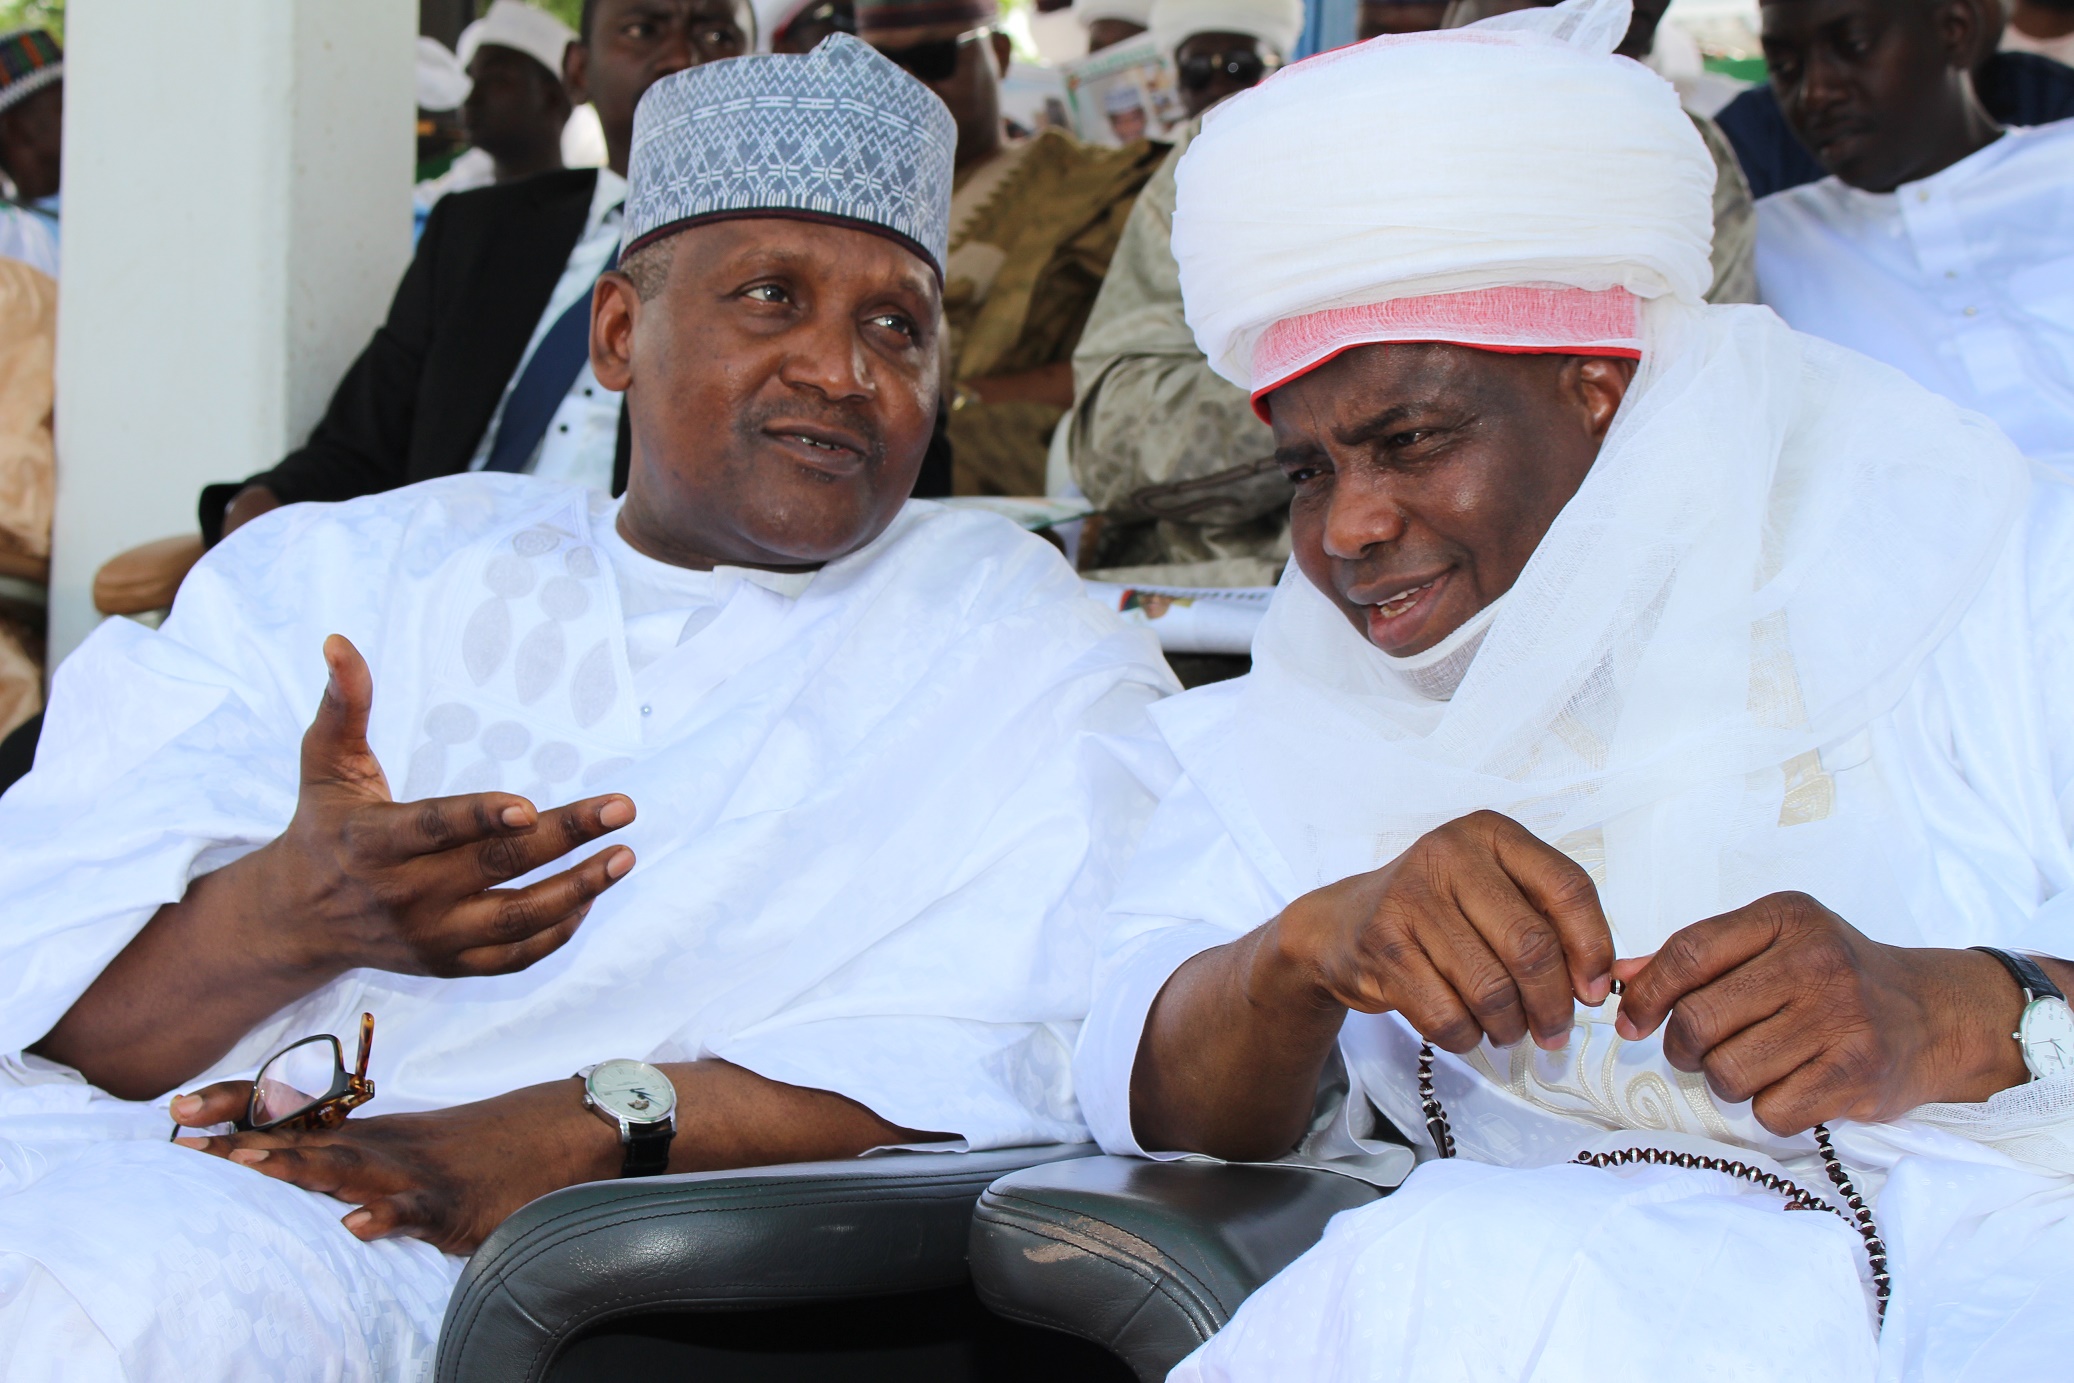 Business mogul Aliko Dangote, with Governor Aminu Waziri Tambuwal during a mini Durbar organised by the Sultanate Council as part of sallah activities in Sokoto...Monday 12/09/16 